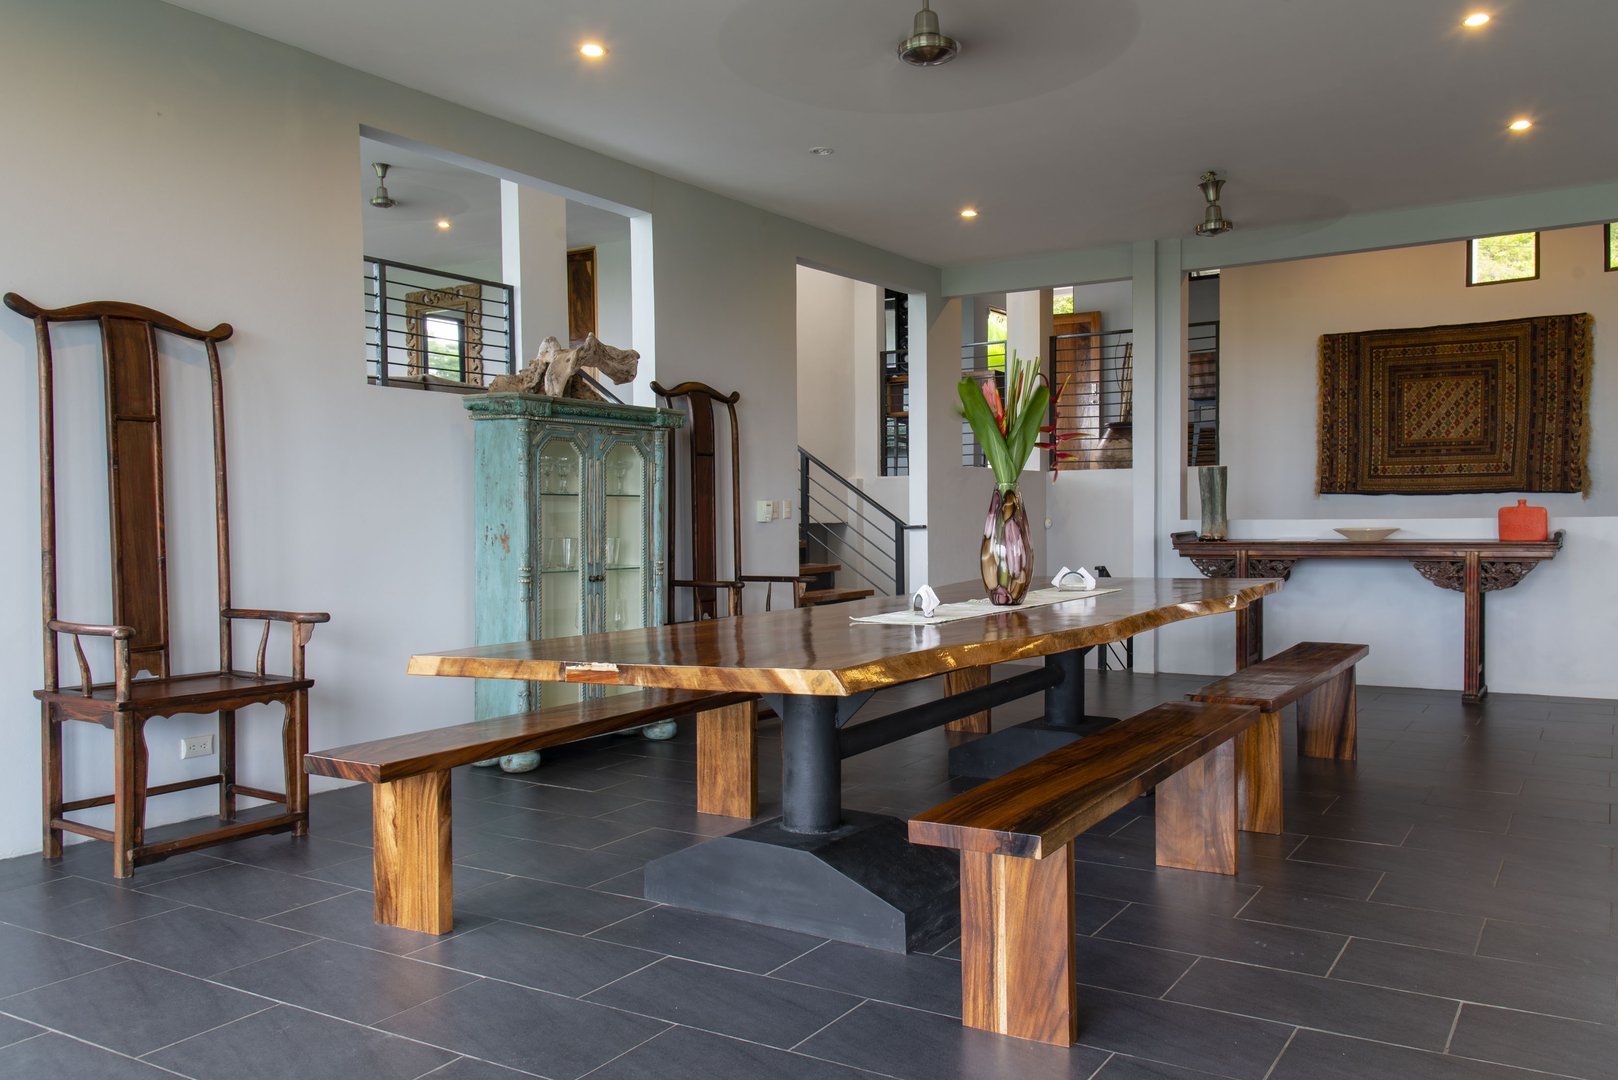 This is no ordinary dining table and the room is complimented with unusual pieces to create a spectacular look at his Manuel Antonio vacation rental.